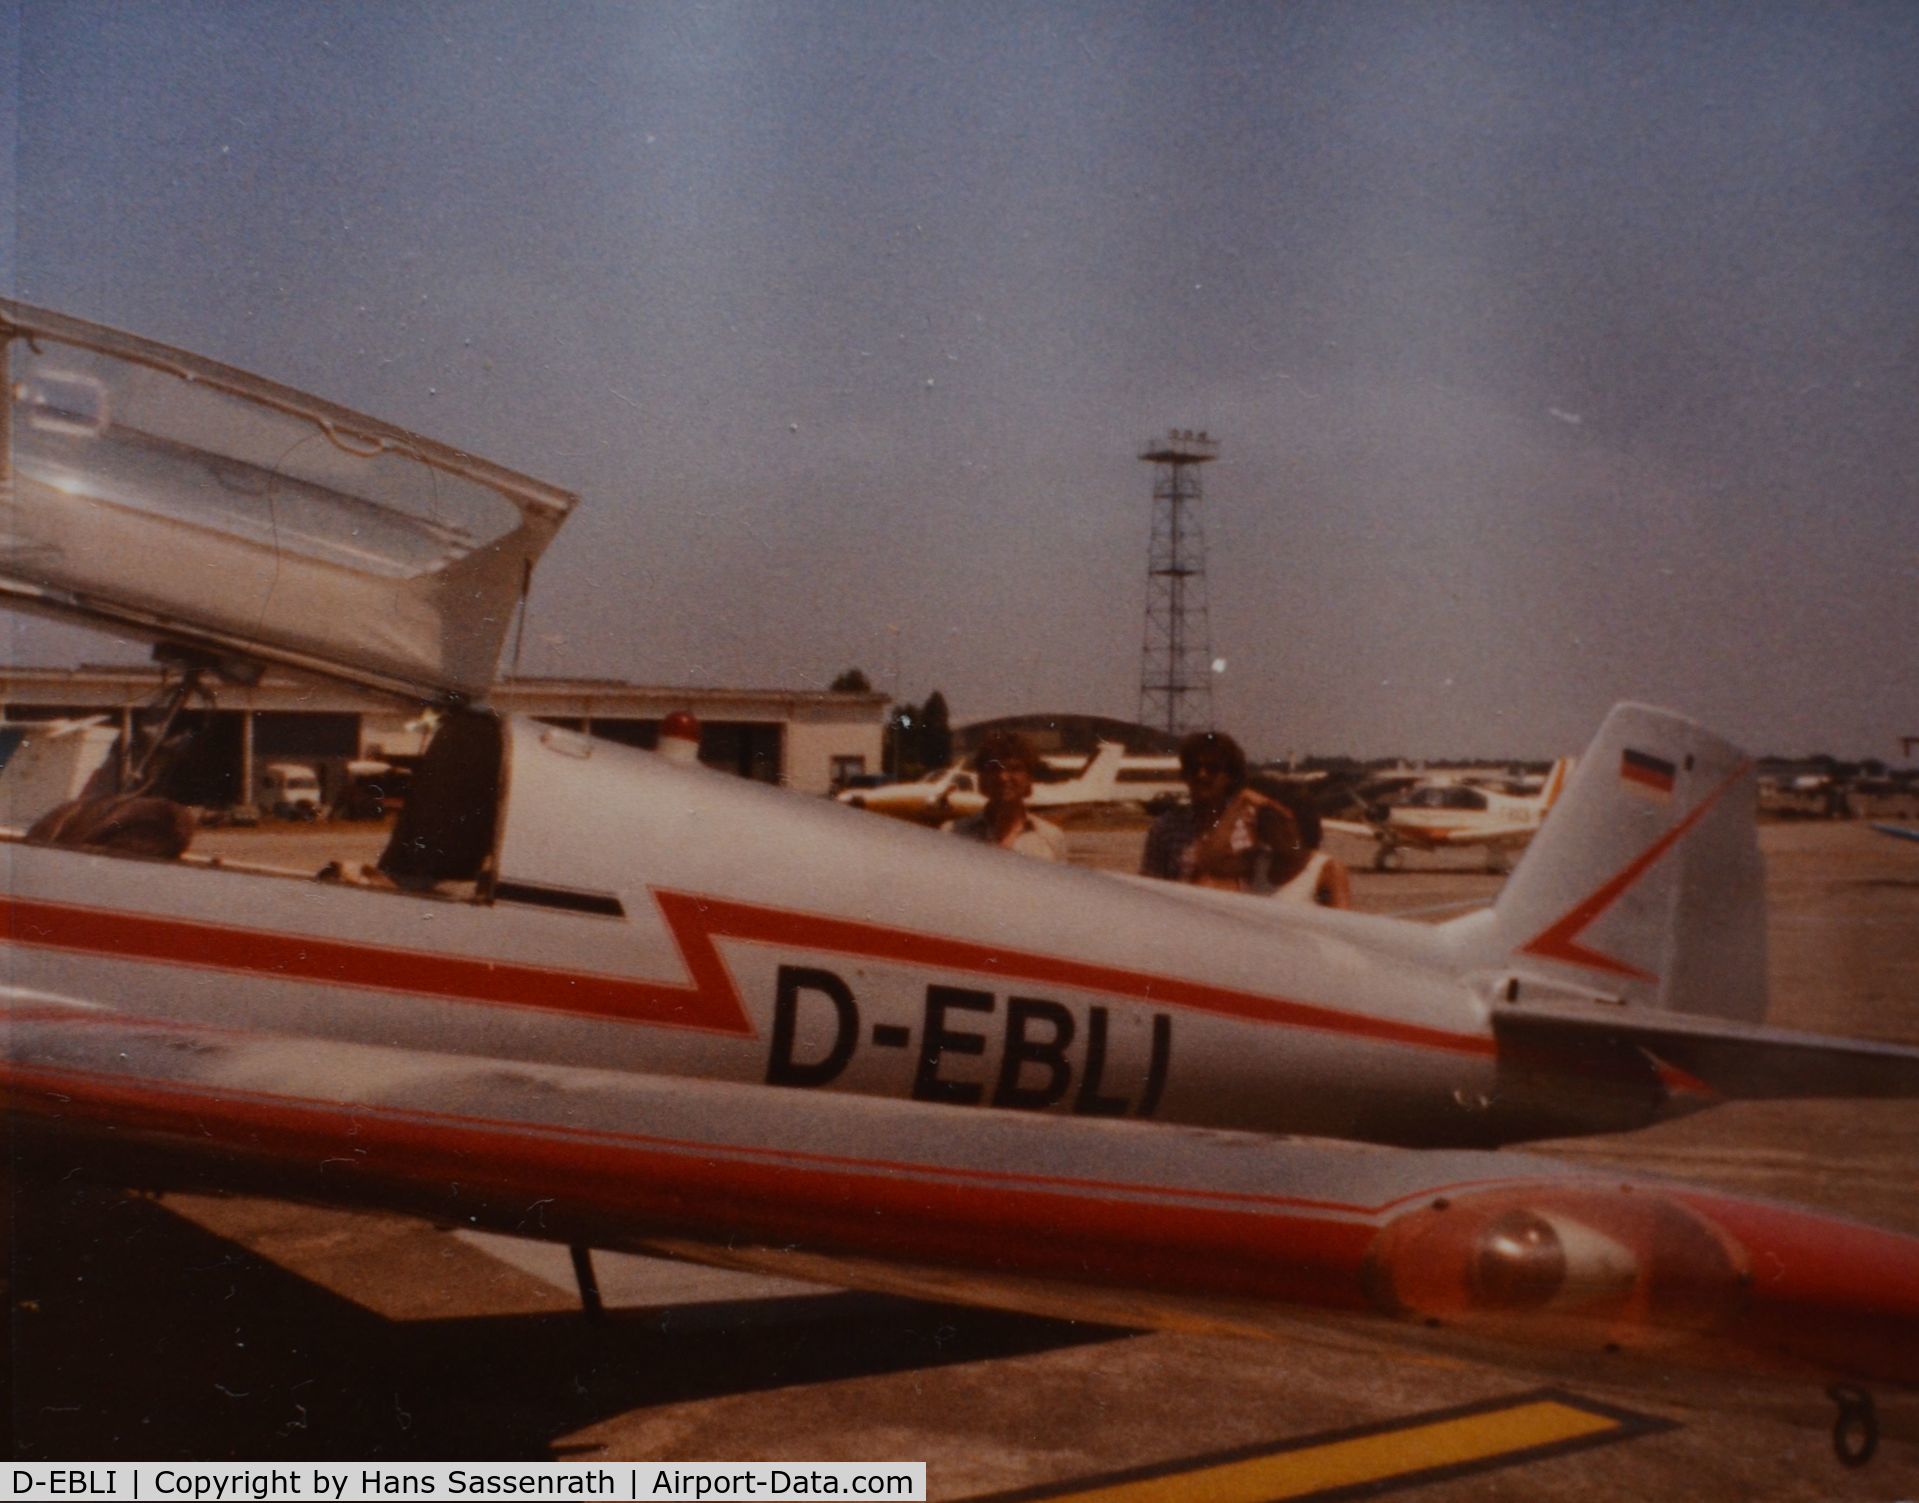 D-EBLI, Bolkow Bo-207 C/N 223, Plane of my father and his friends. In the early 1980s.